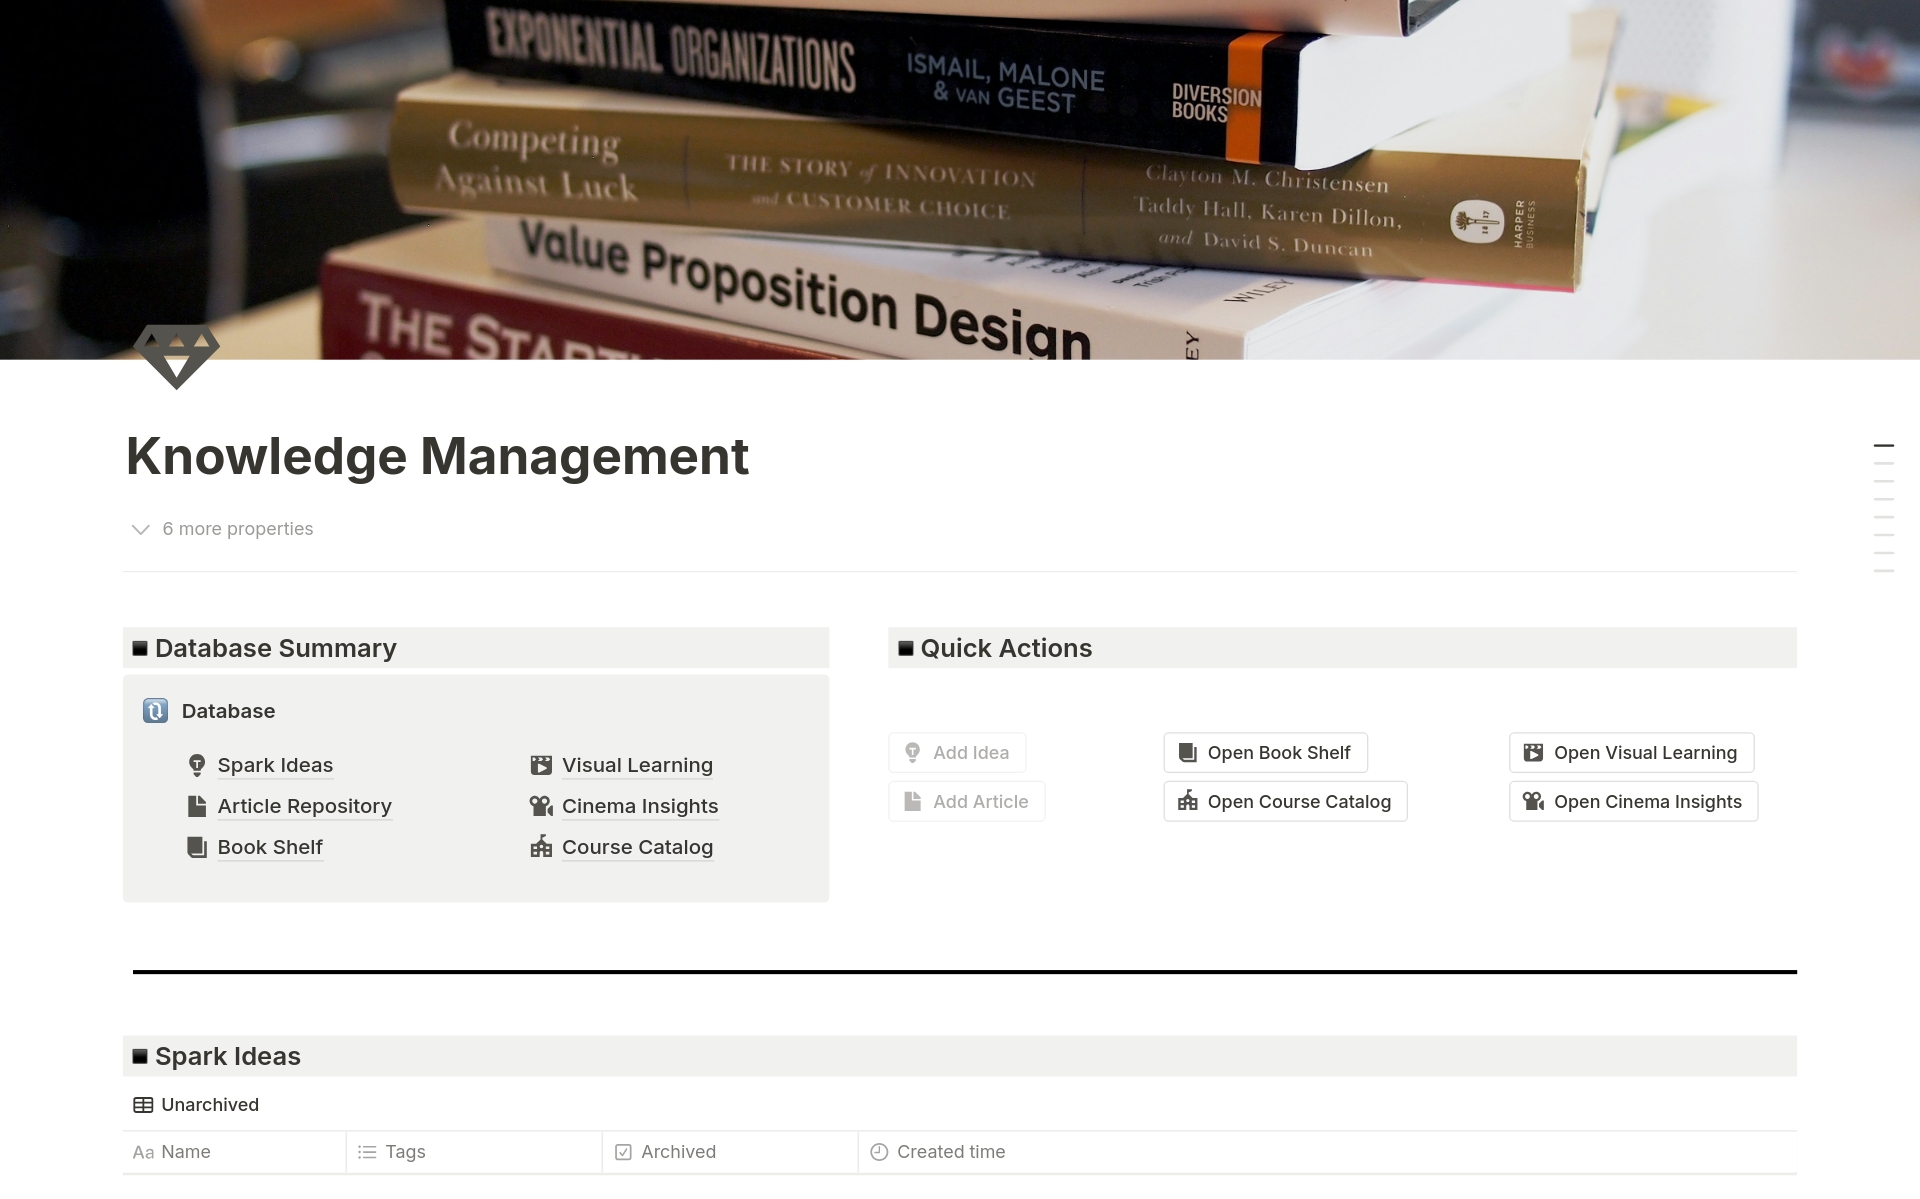 This template aims to help you efficiently organize and manage various types of knowledge resources, including inspirations, articles, books, videos, movies, and courses. 